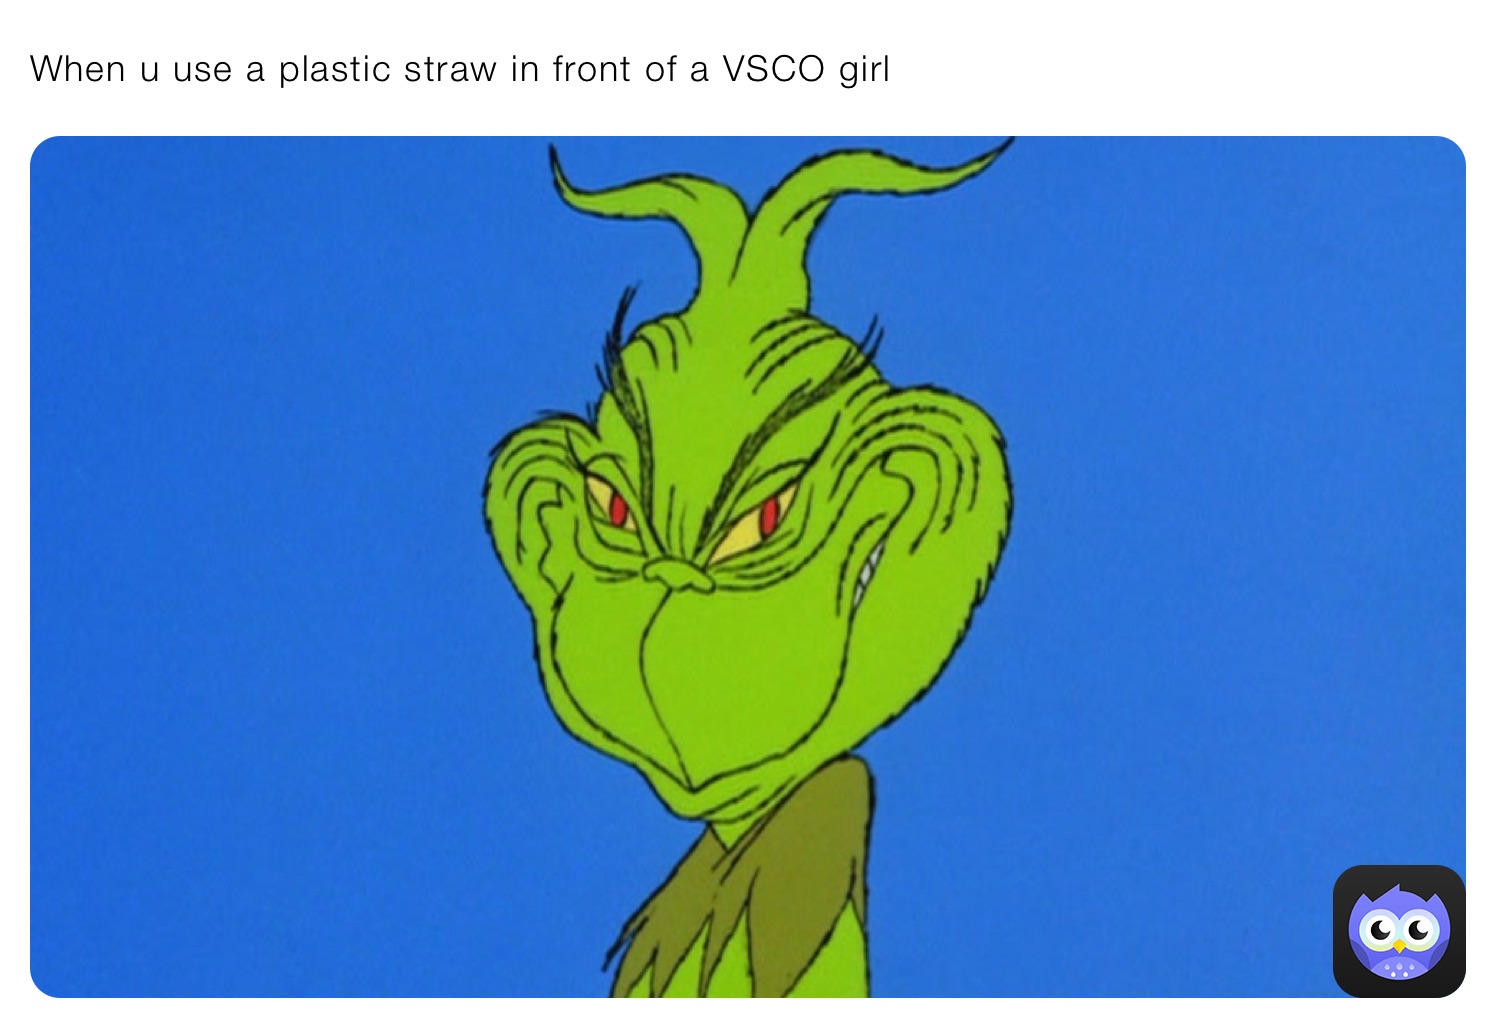 When u use a plastic straw in front of a VSCO girl